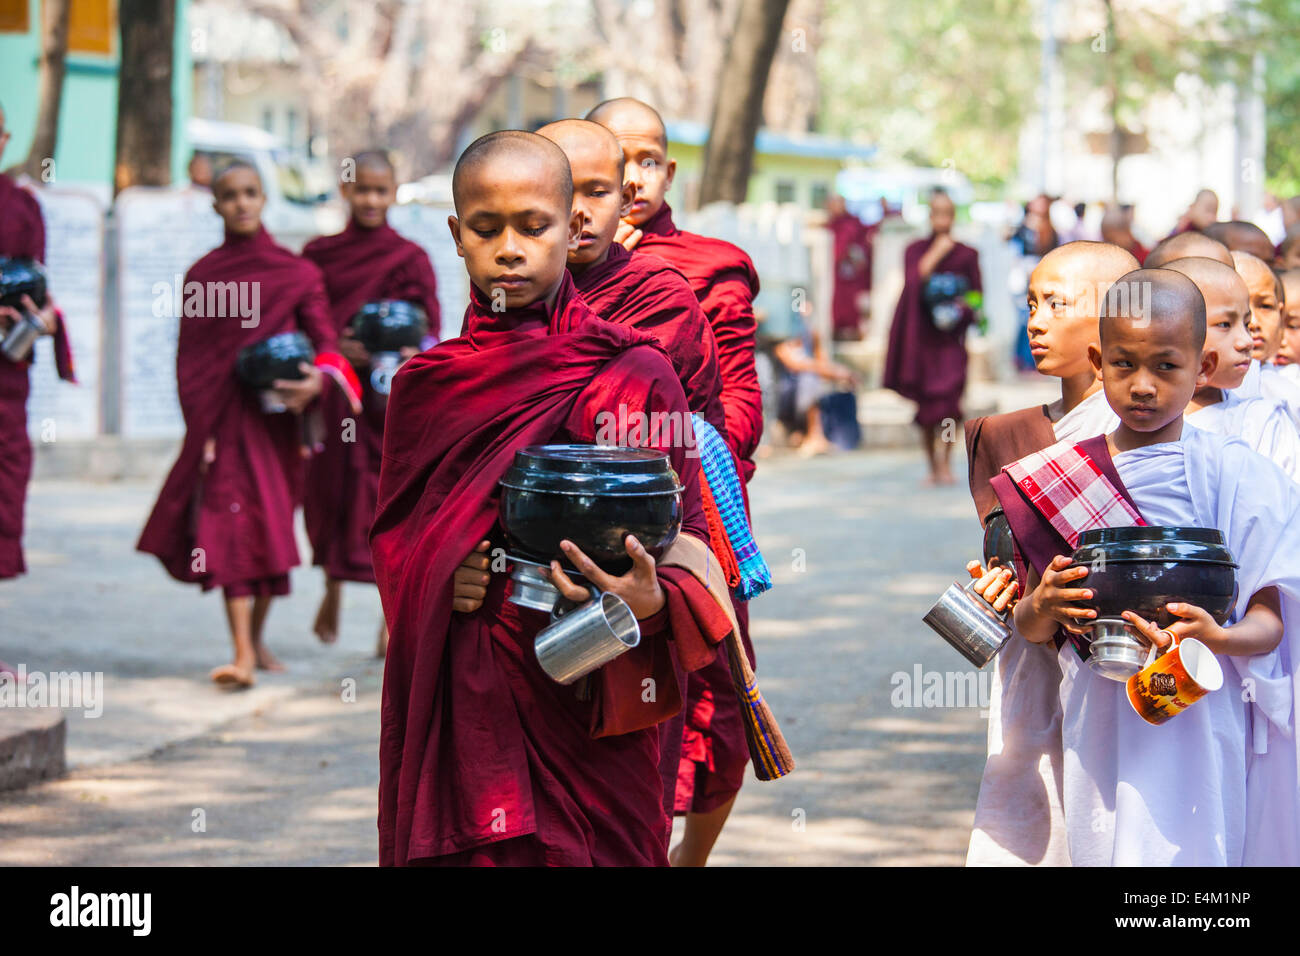 Buddhist monks and nuns wait for food during an Alms Ceremony at the Maha Aung Mye Bonzan Monastery in Mandalay, Myanmar. Stock Photo